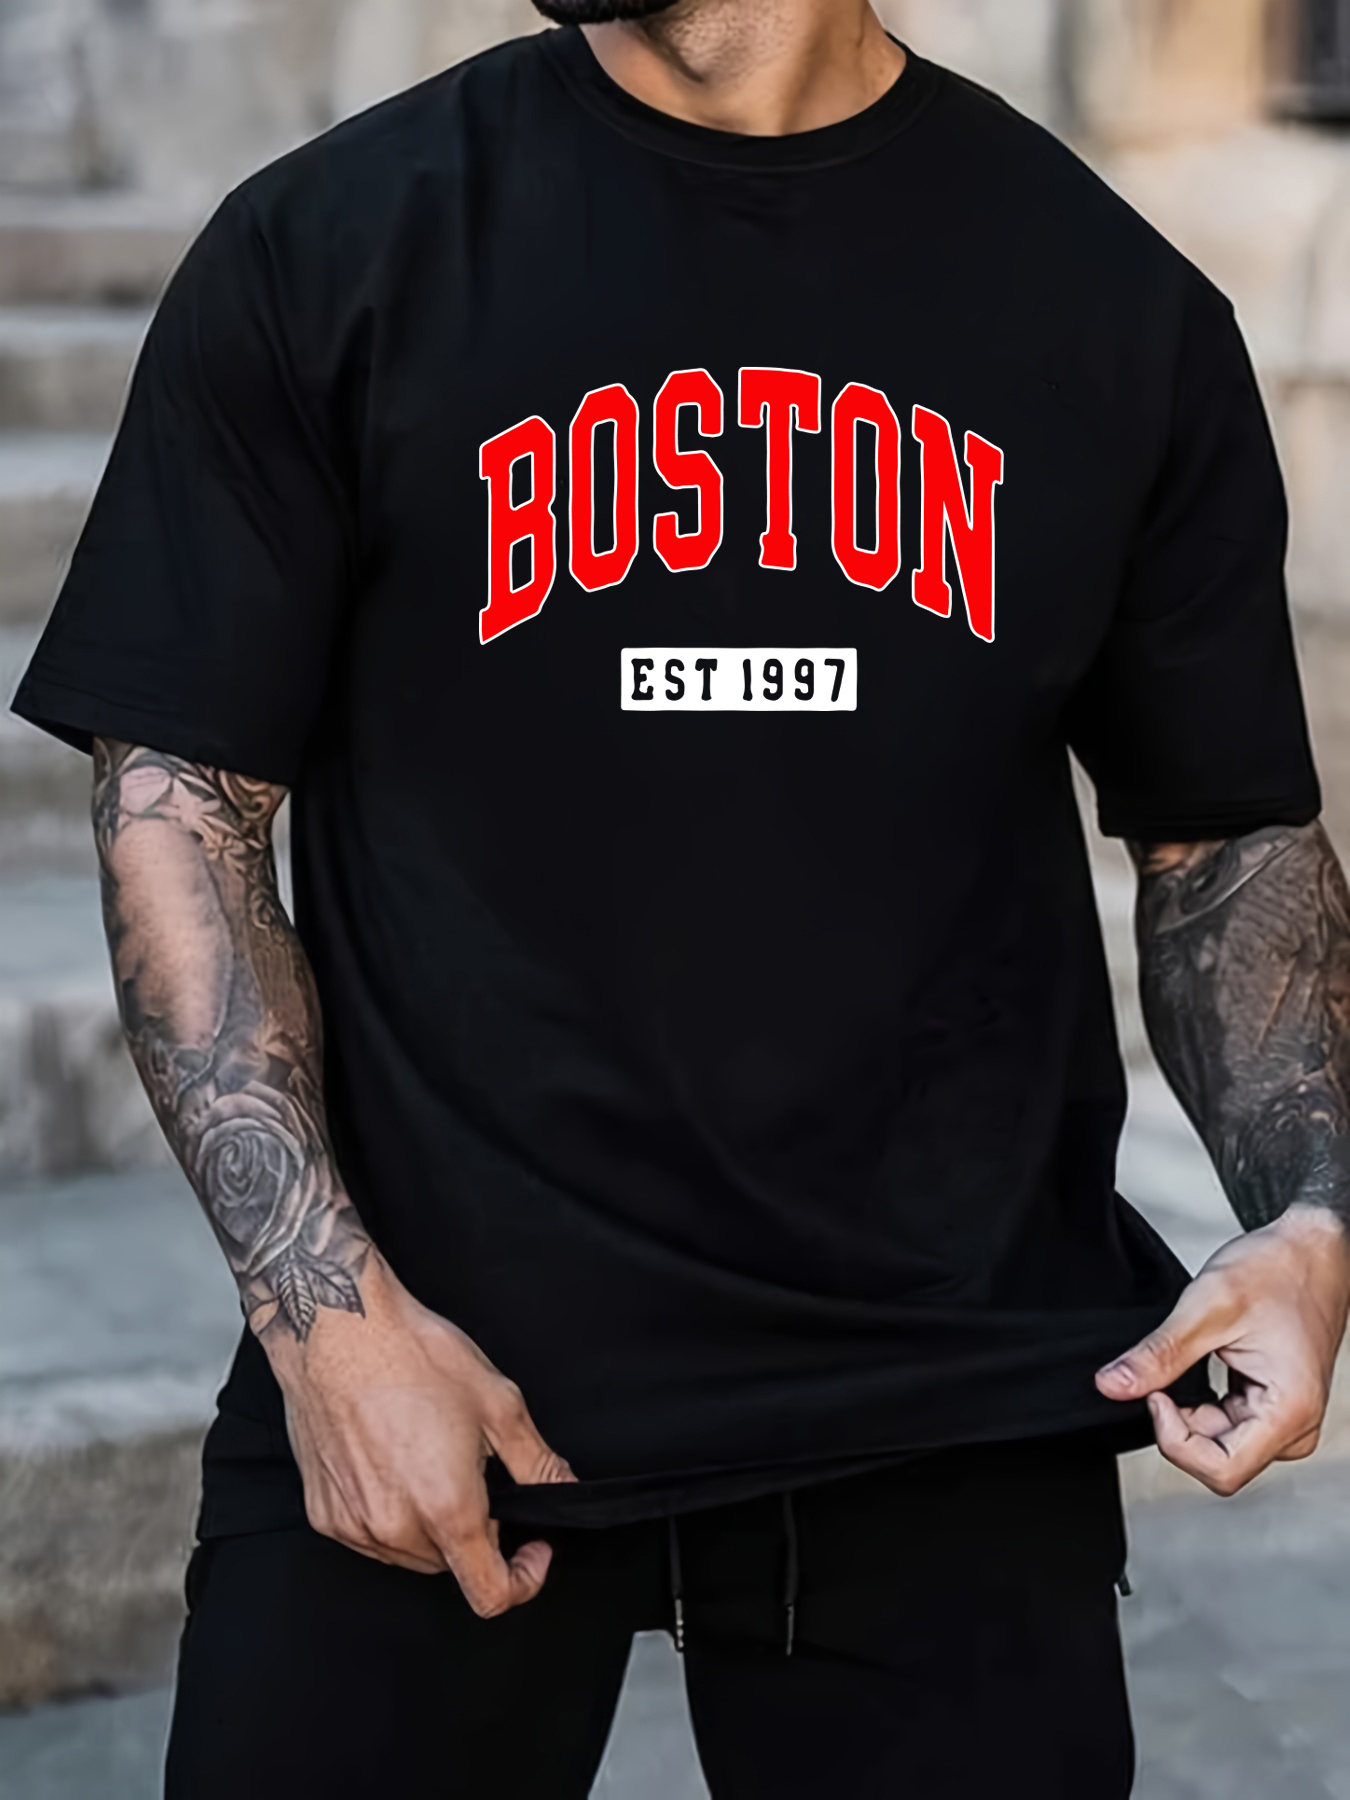 boston print short sleeve t shirts for men plus size stretchy graphic tees for summer casual daily style details 11